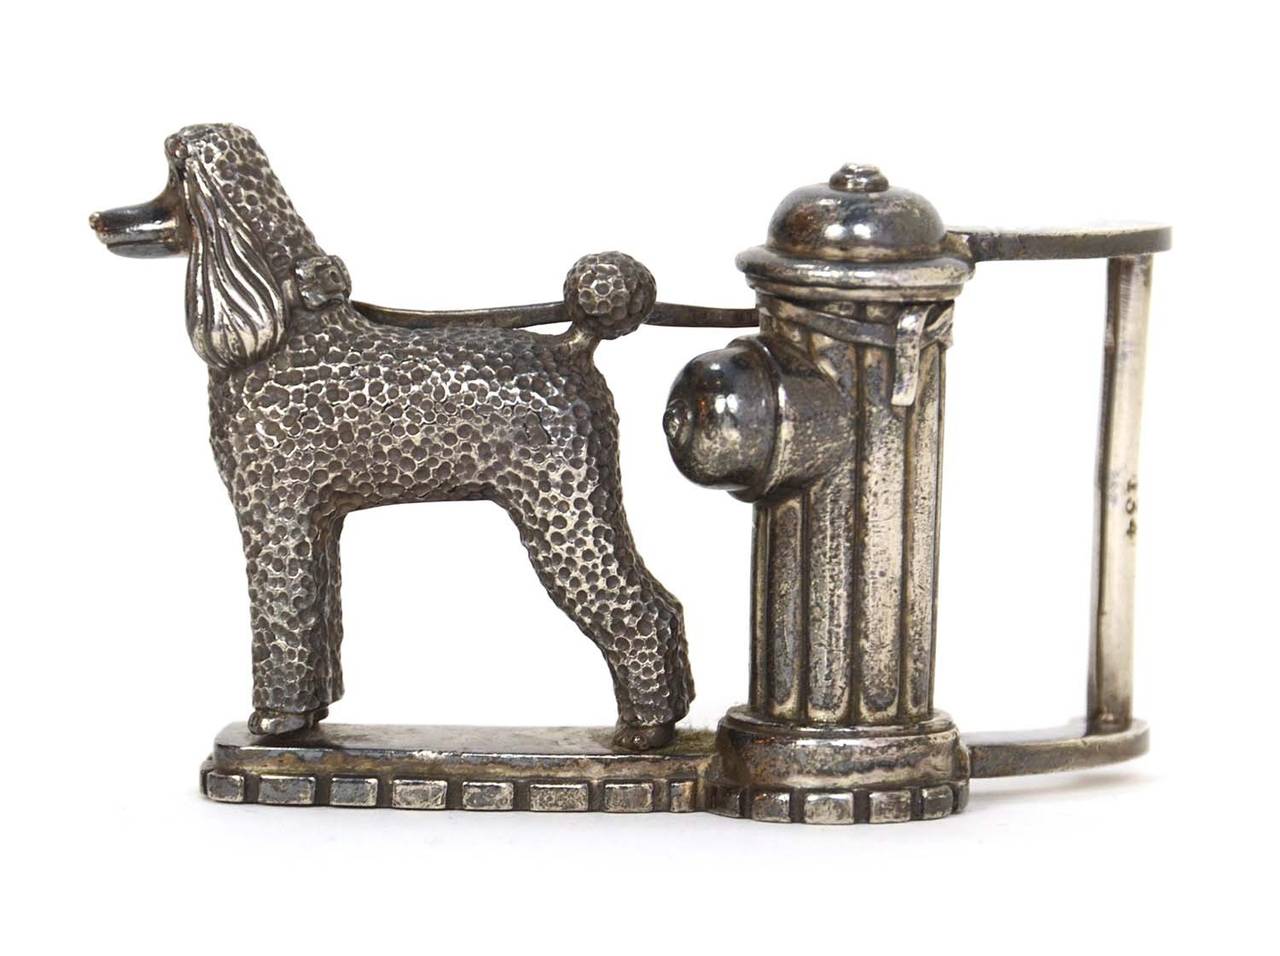 B.Kieselstein-Cord & A.Beckmann Alligator Belt w/Poodle & Hydrant Buckle
Made in: Buckle & Cord- U.S.A.
Color: Silver and black
Materials: Buckle- Sterling silver, cord- alligator skin
Serial Number/Date Stamp: B.Kieselstein-Cord 2000